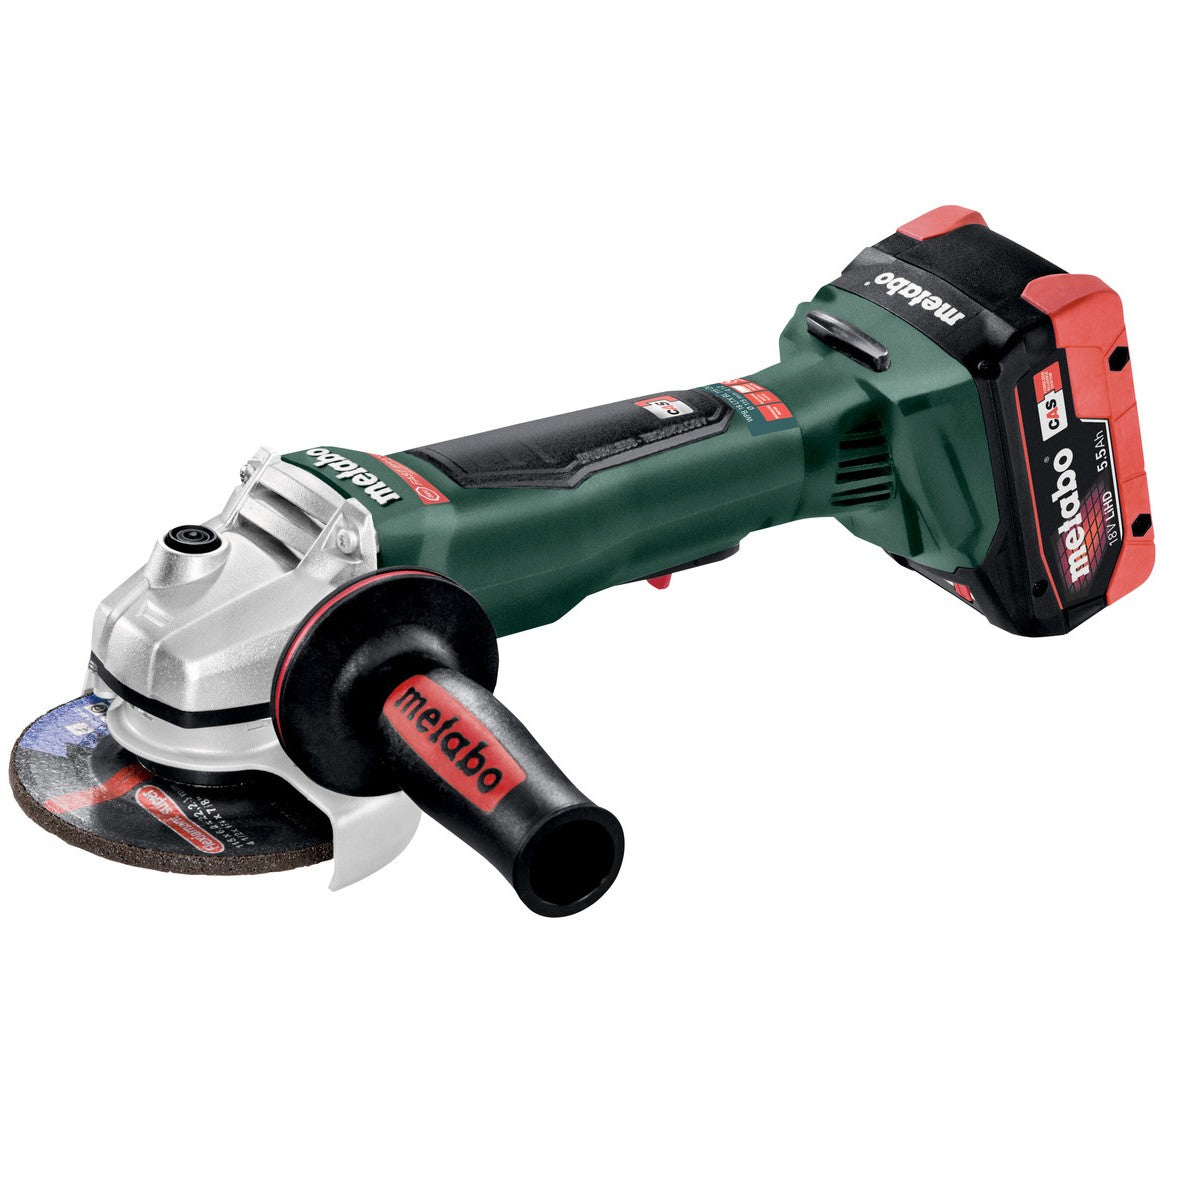 Metabo (613074620) 412 inch 18V Cordless Angle Grinder w 2x55AH LIHD Batteries